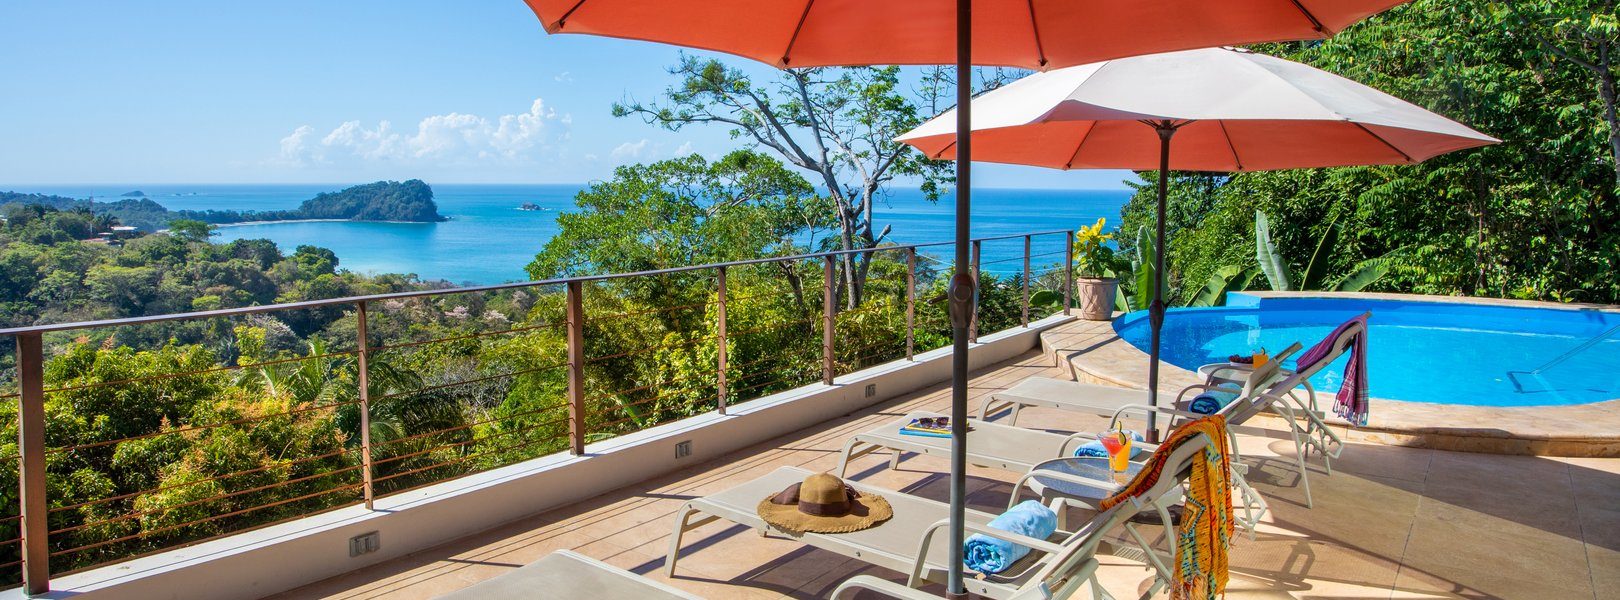 Spend your Manuel Antonio vacation relaxing in your jungle hill-top villa with this incredible view.